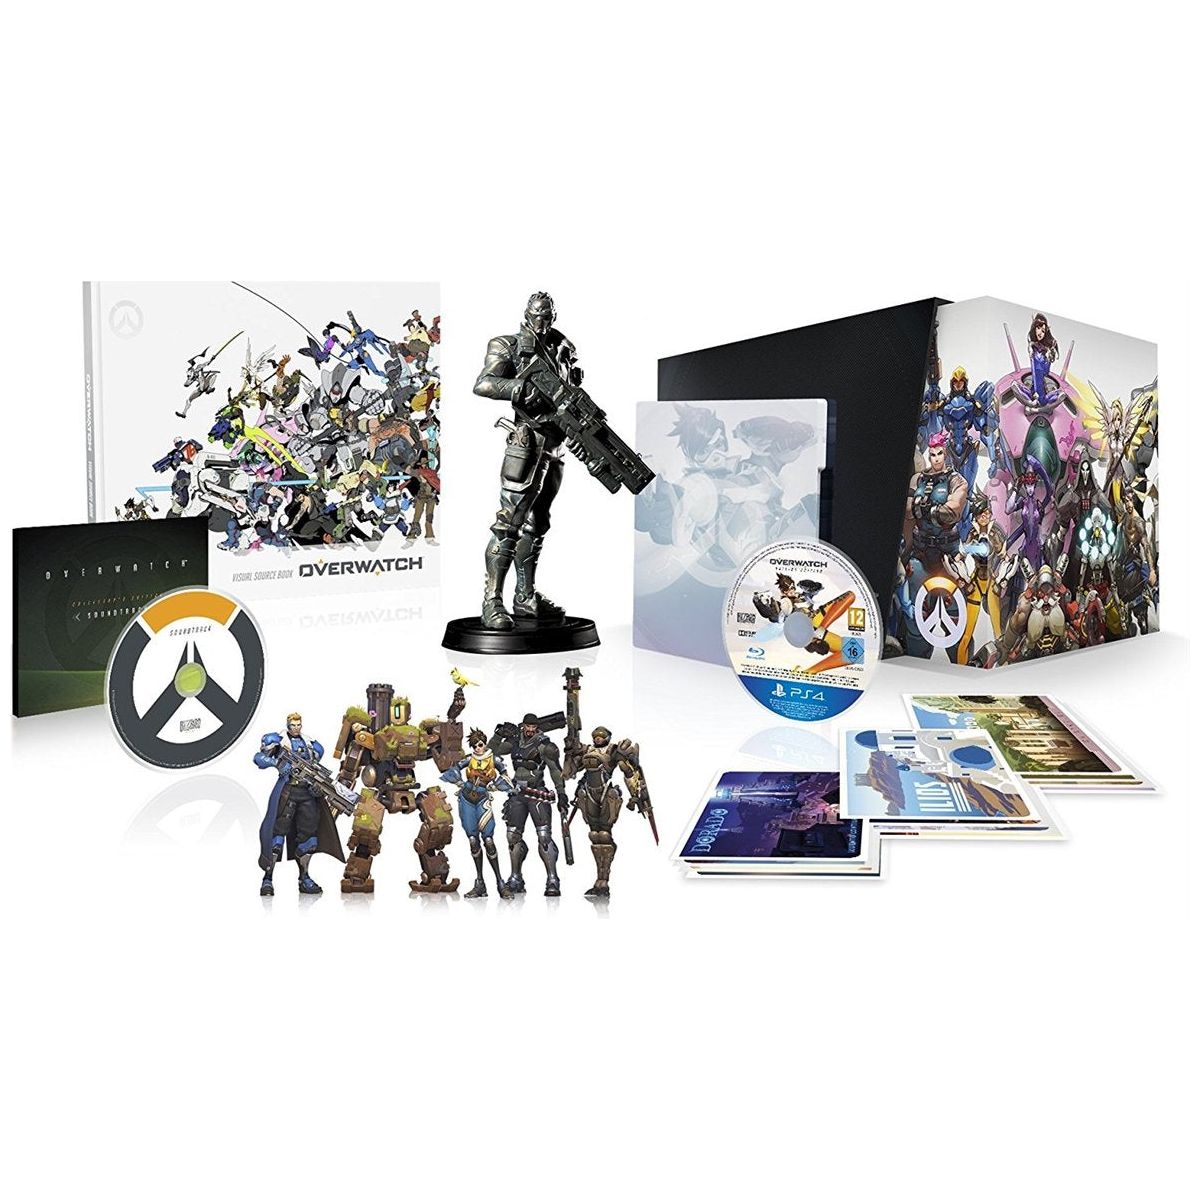 PS4 - Overwatch Collector's Edition (Sealed)